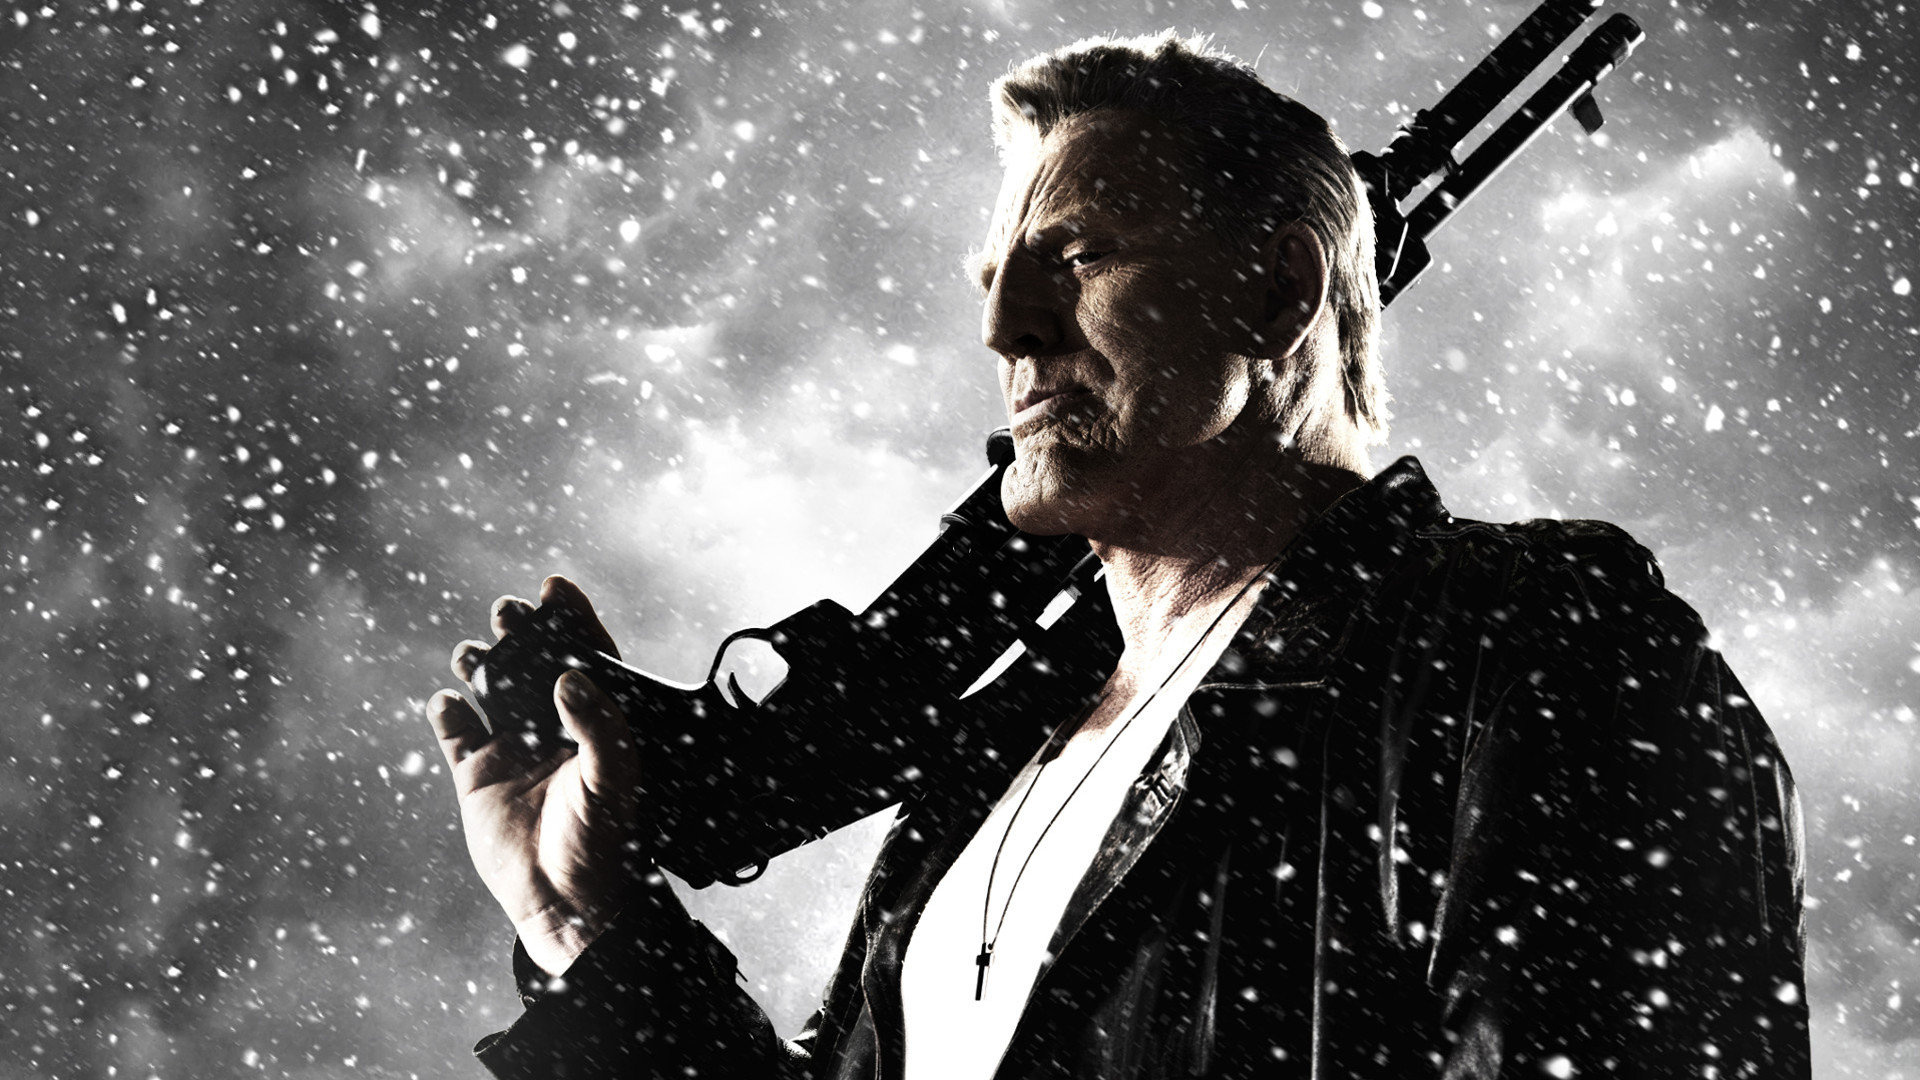 Sin City: Sequel, A Dame To Kill For, Mickey Rourke as Marv. 1920x1080 Full HD Background.